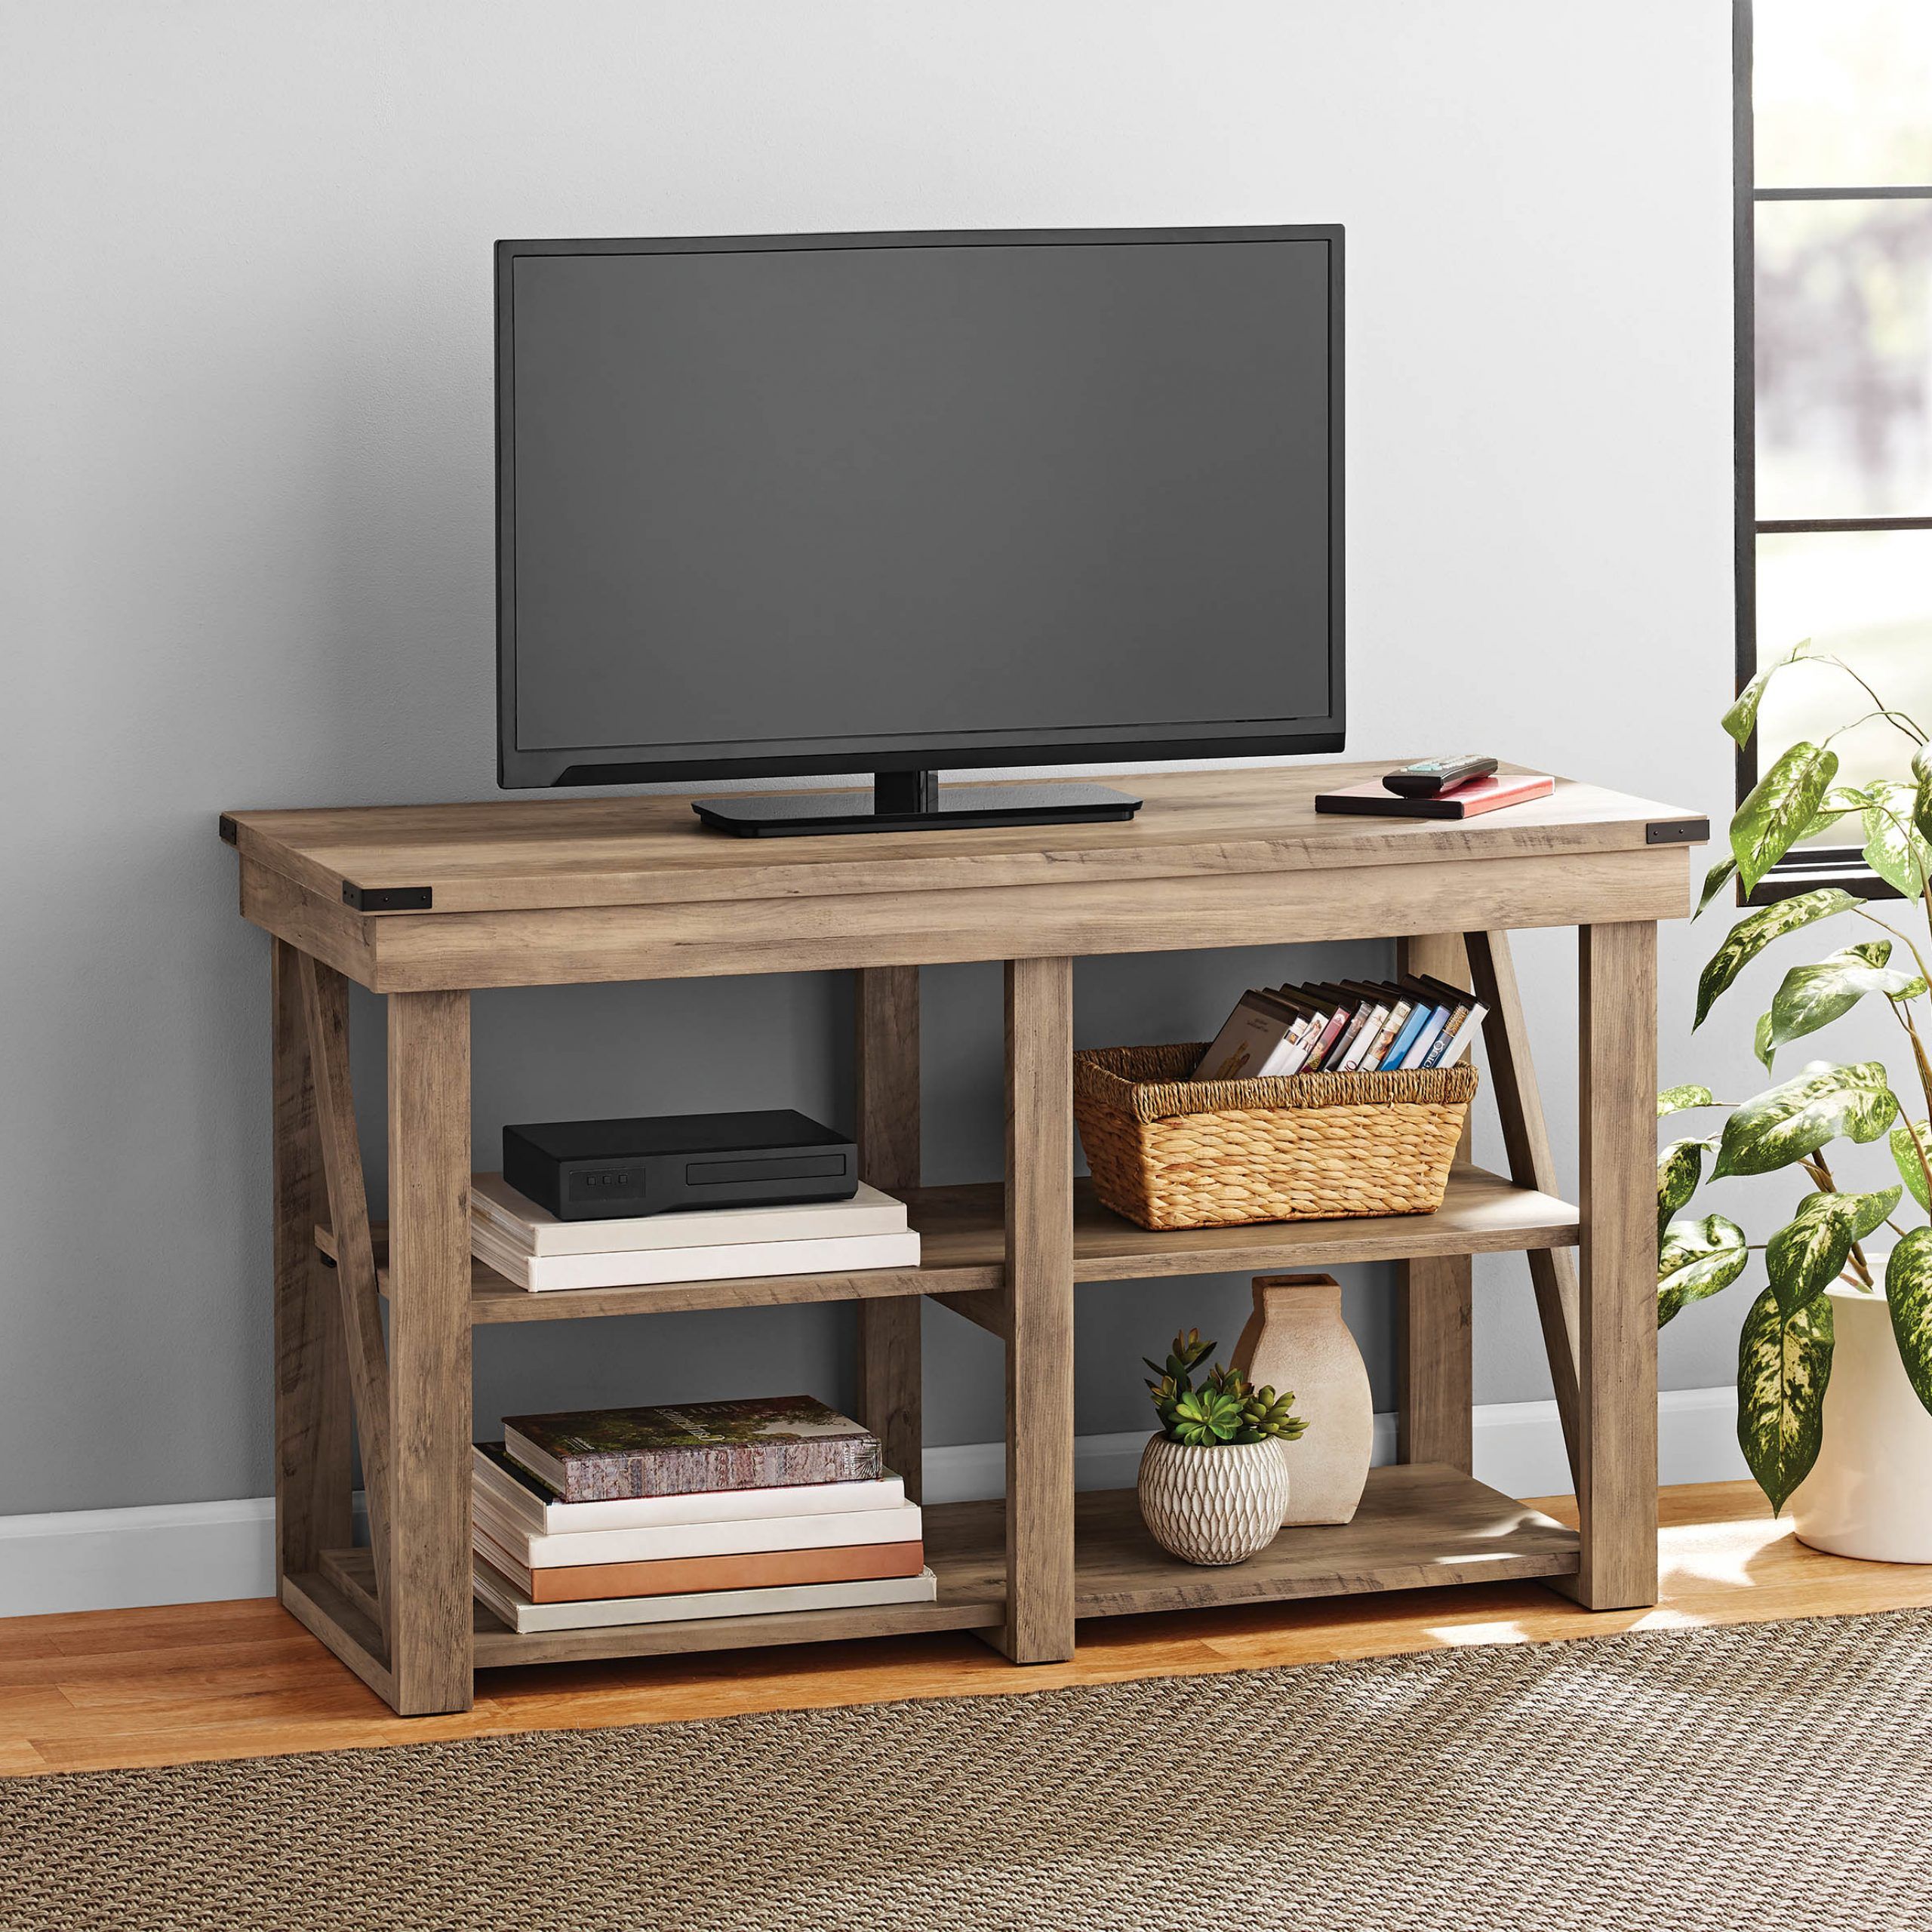 Mainstays Lawson Tv Stand For Tvs Up To 55", Rustic Oak For Sahika Tv Stands For Tvs Up To 55" (View 2 of 20)